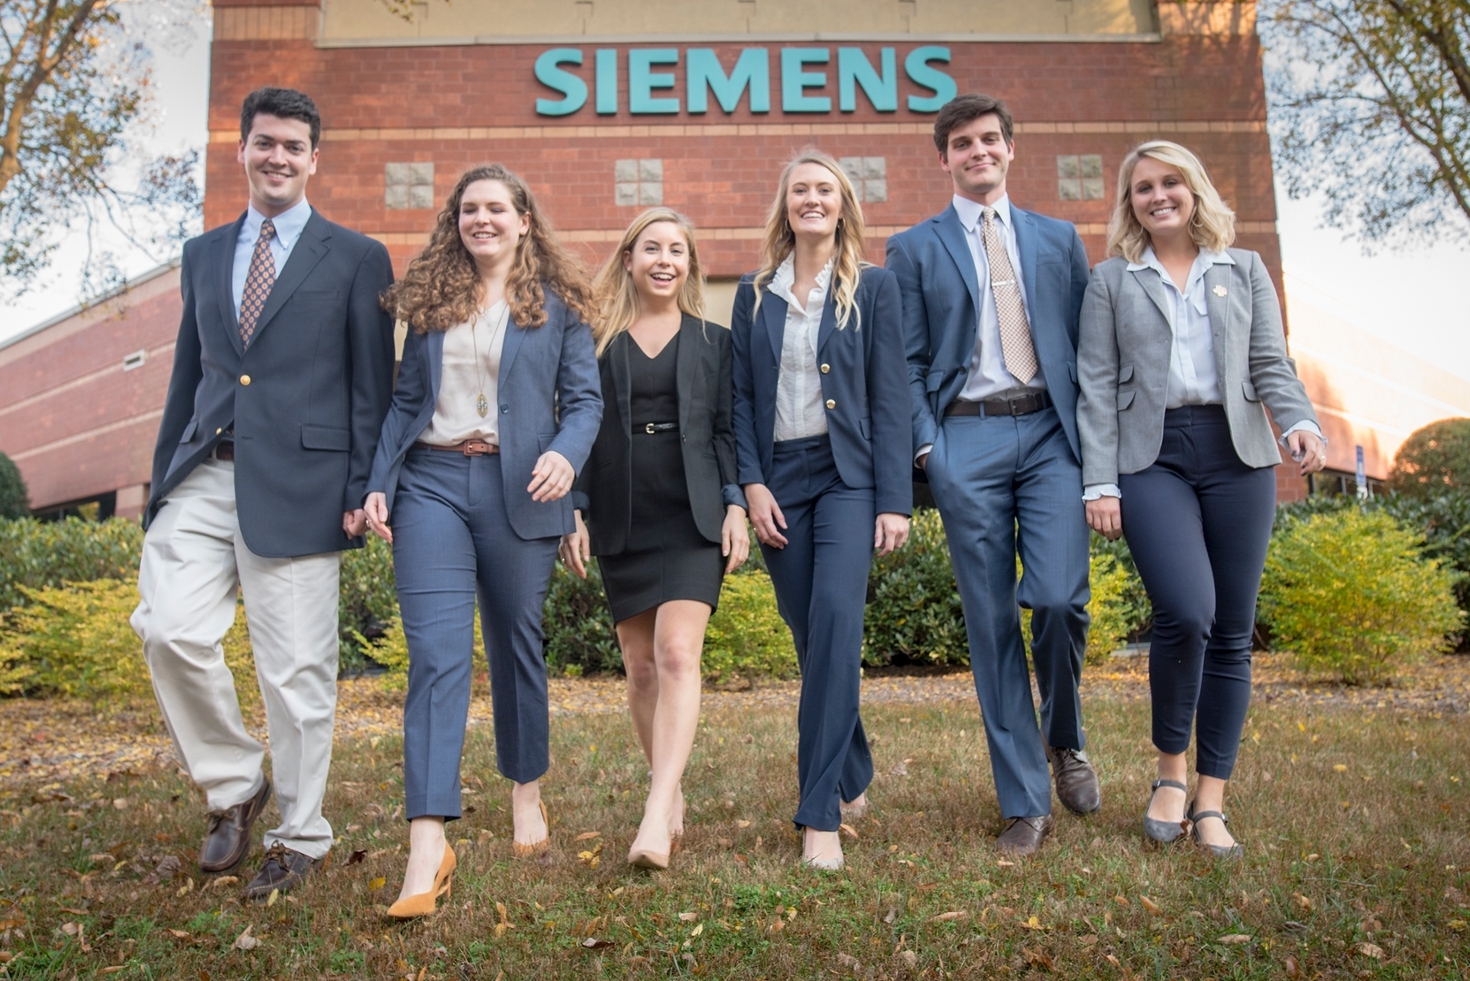 Four female and two male students walking side by side downhill in front of Siemens building.